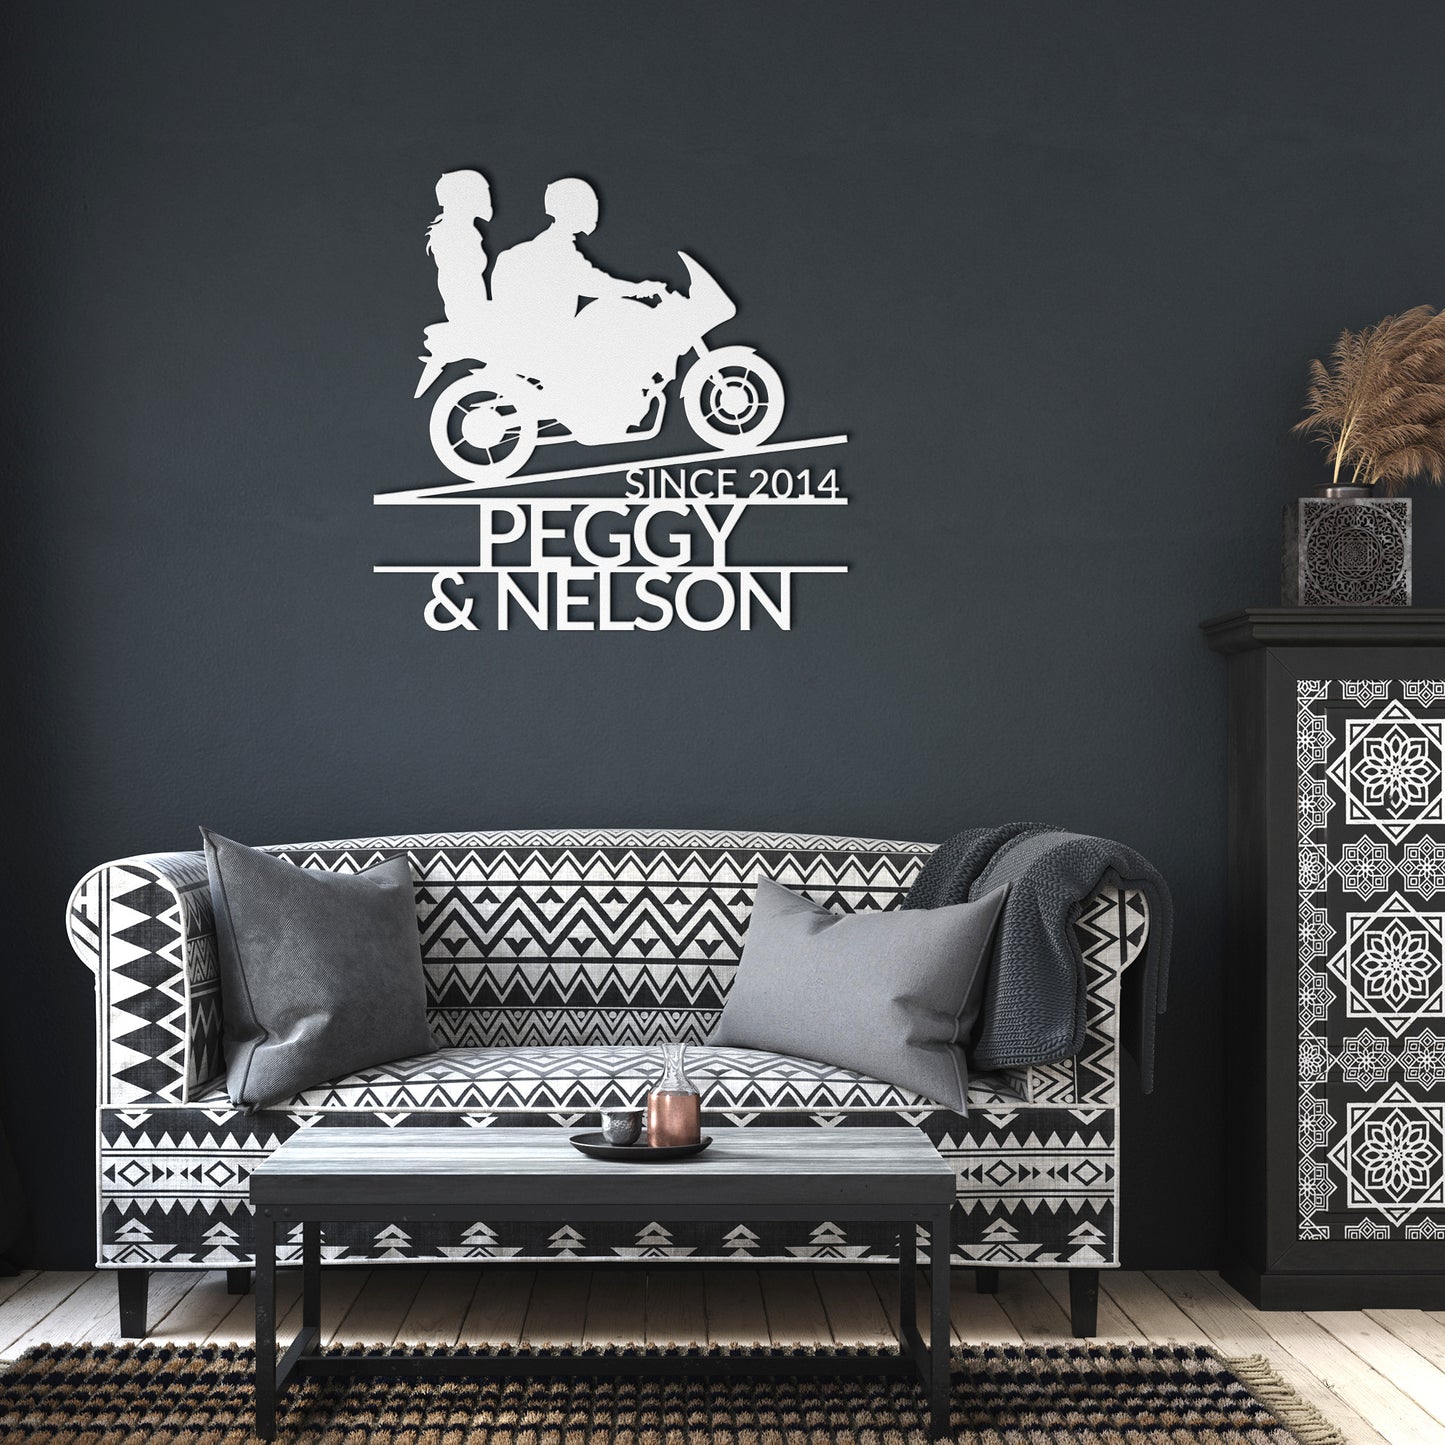 A black Custom Motorcycle Couple Metallic Wall Art featuring a couple riding together on a racer bike uphill, personalized with the names Peggy and Nelson and established year since 2014.